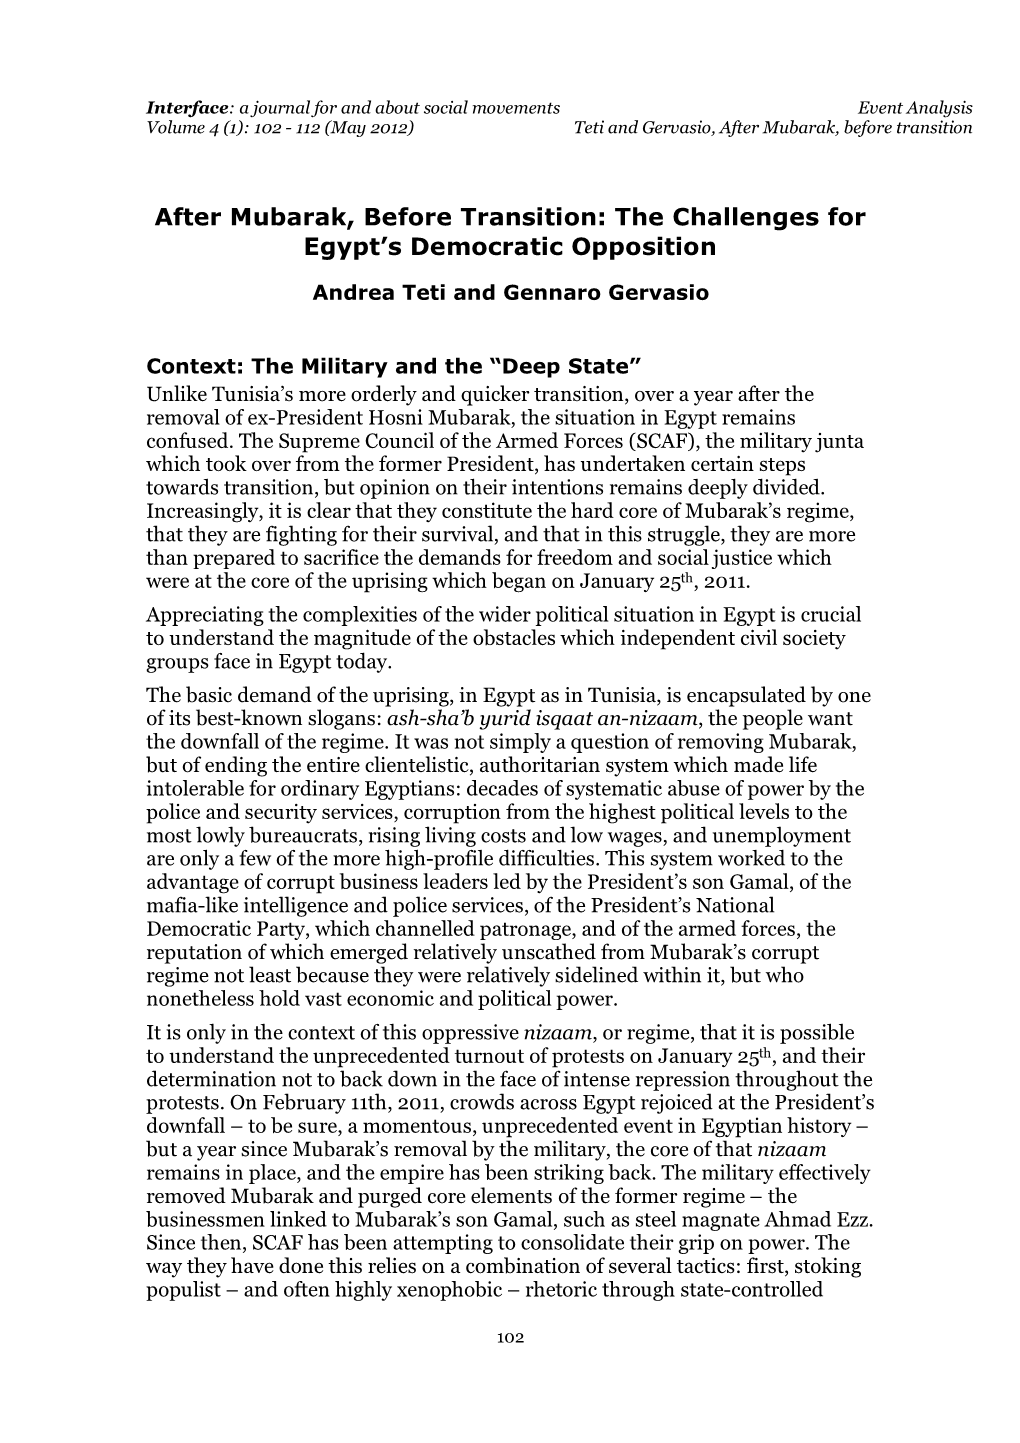 After Mubarak, Before Transition: the Challenges for Egypt's Democratic